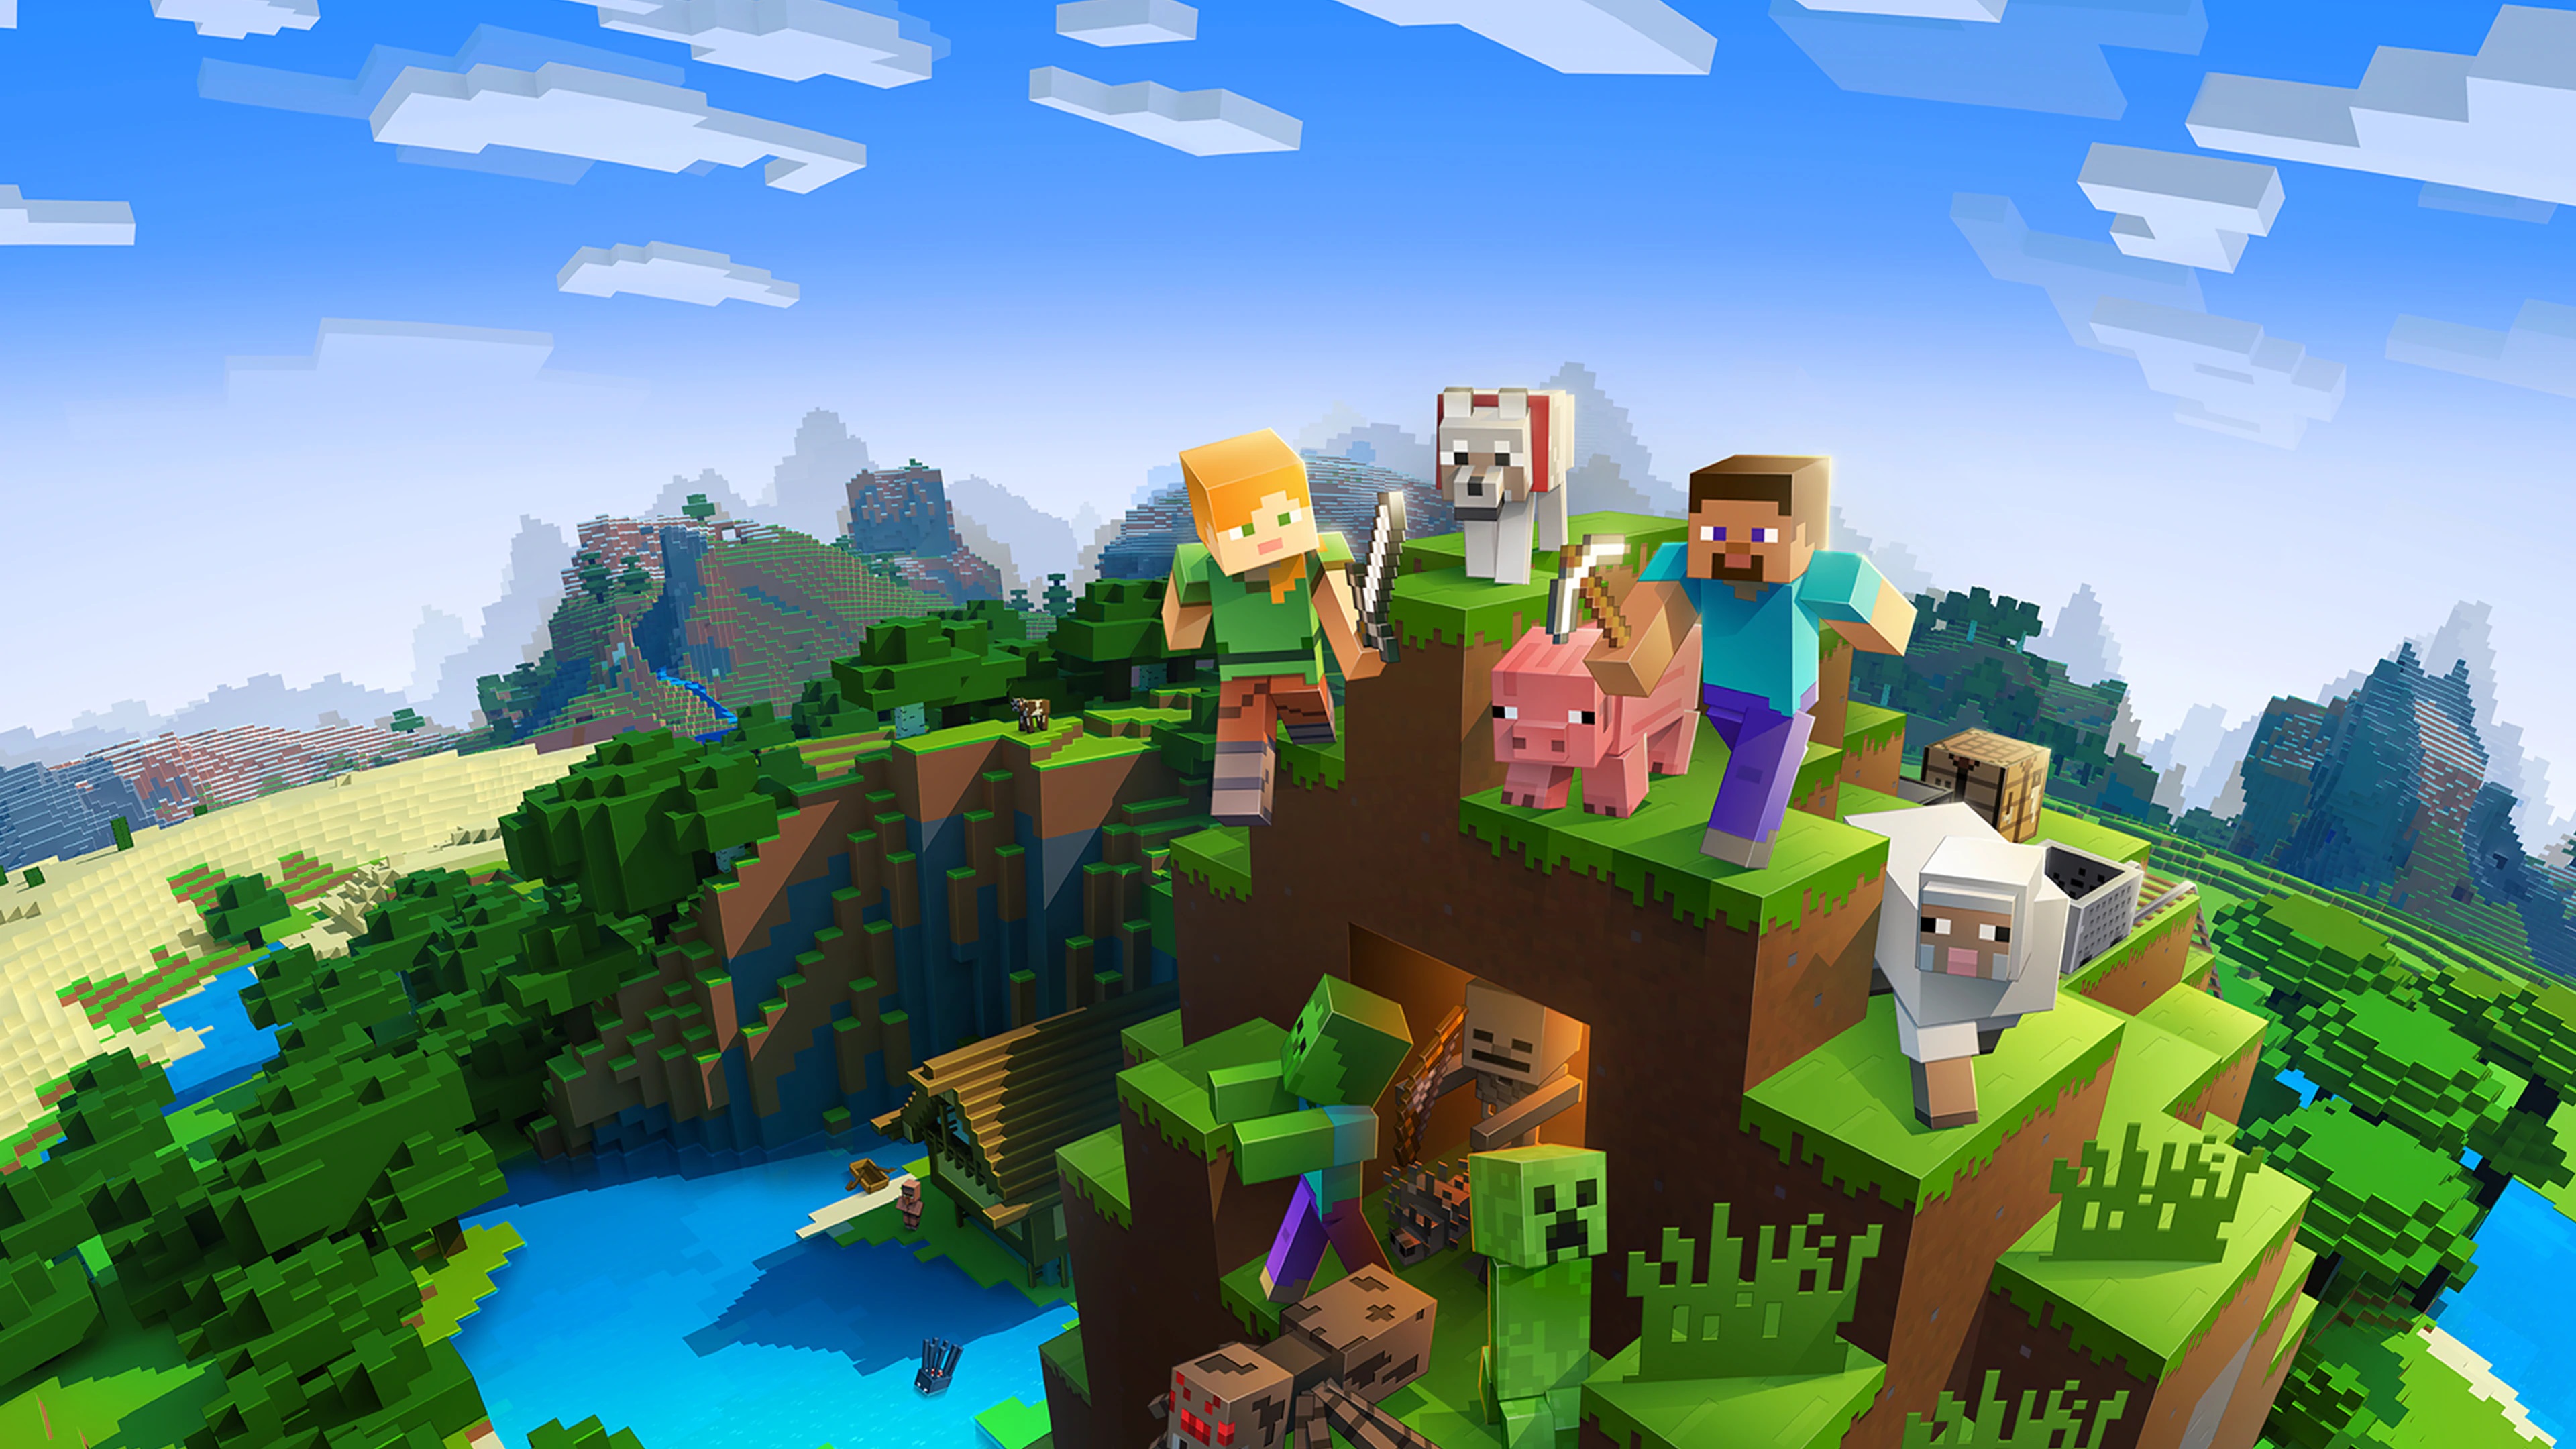 A 12-year-old high school kid made $399,000 in 9 hours by selling Minecraft art as NFT